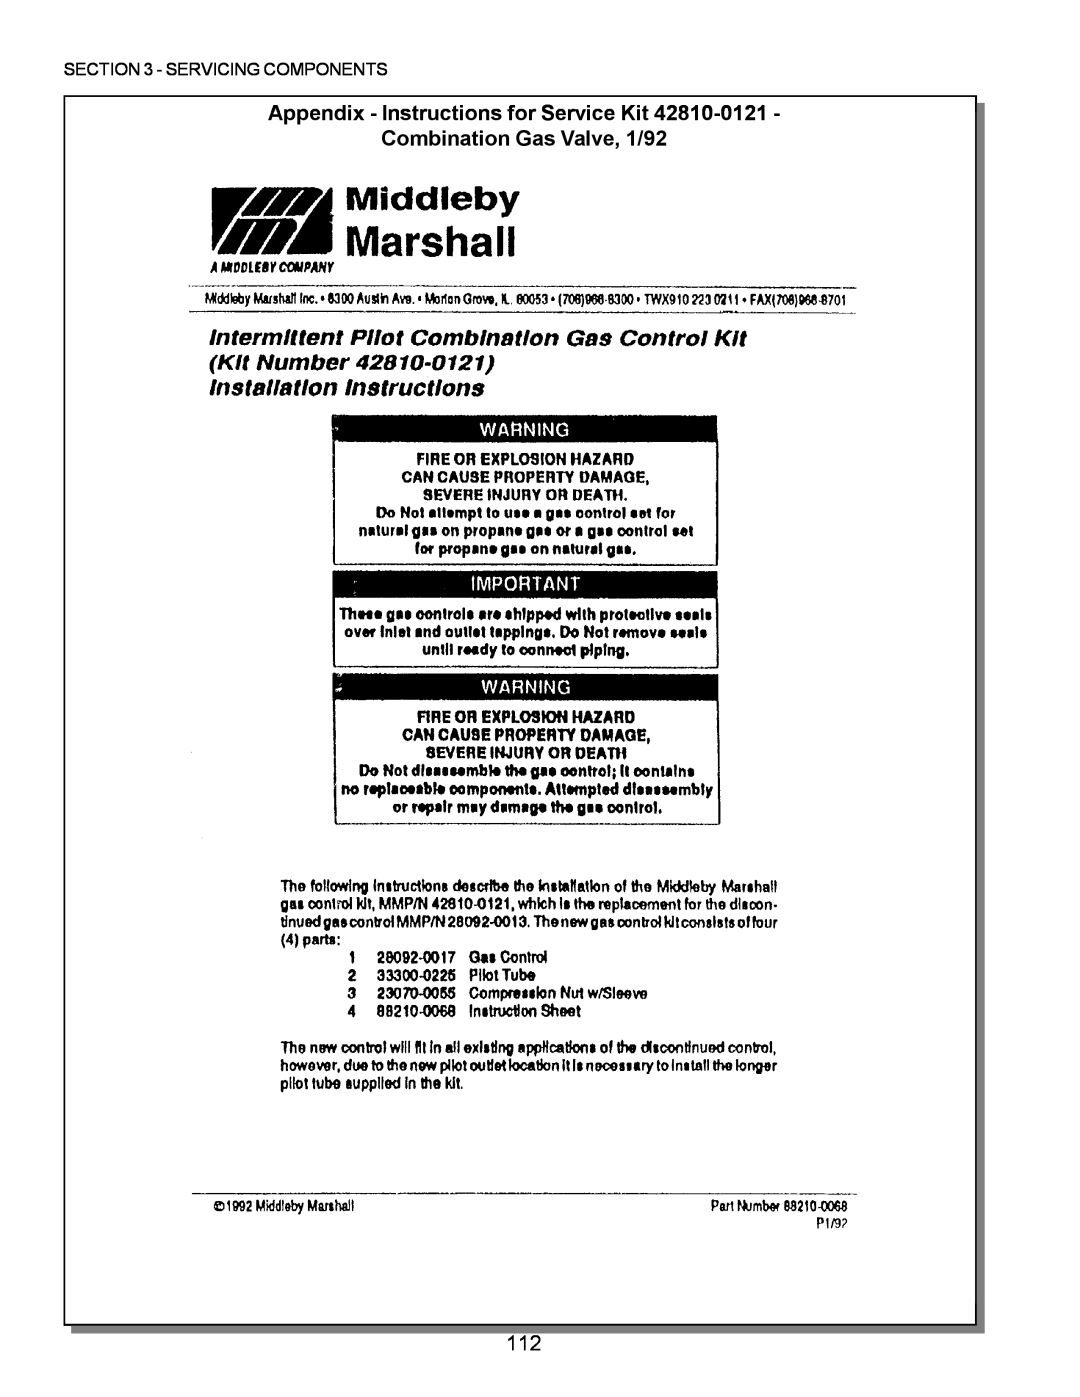 Middleby Marshall PS224 PS310 Appendix - Instructions for Service Kit Combination Gas Valve, 1/92, Servicing Components 